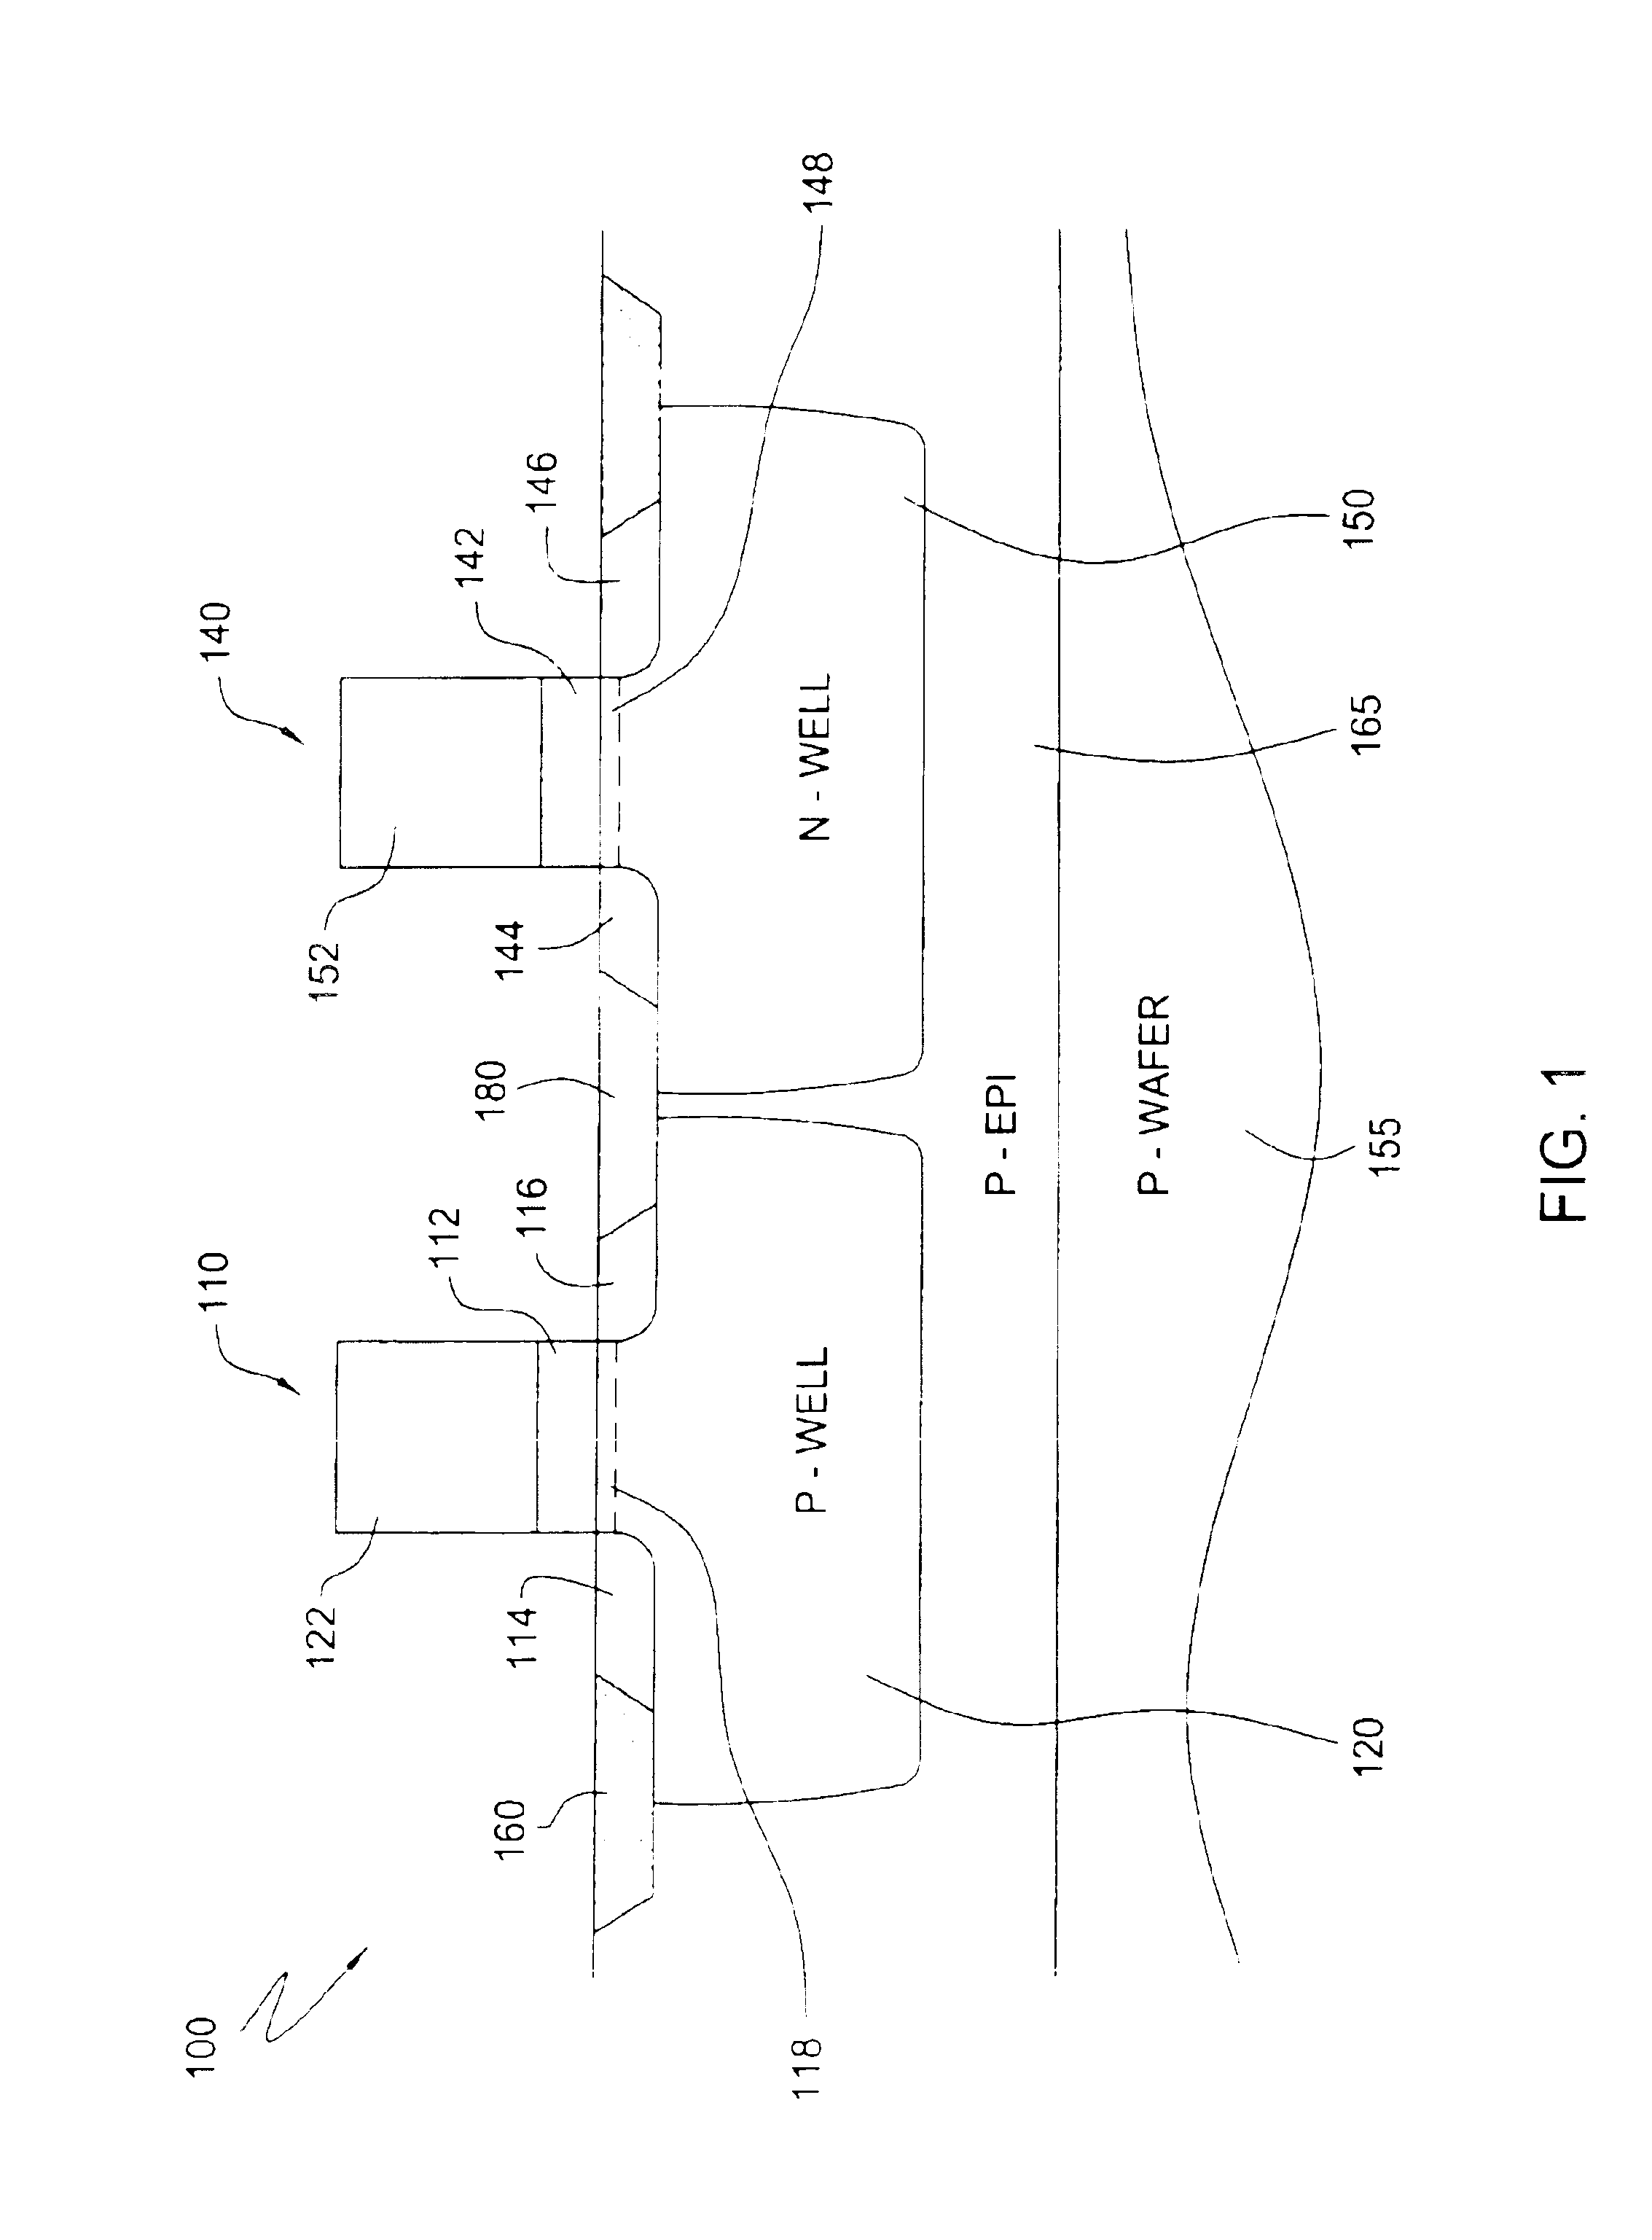 System and method for forming a gate dielectric